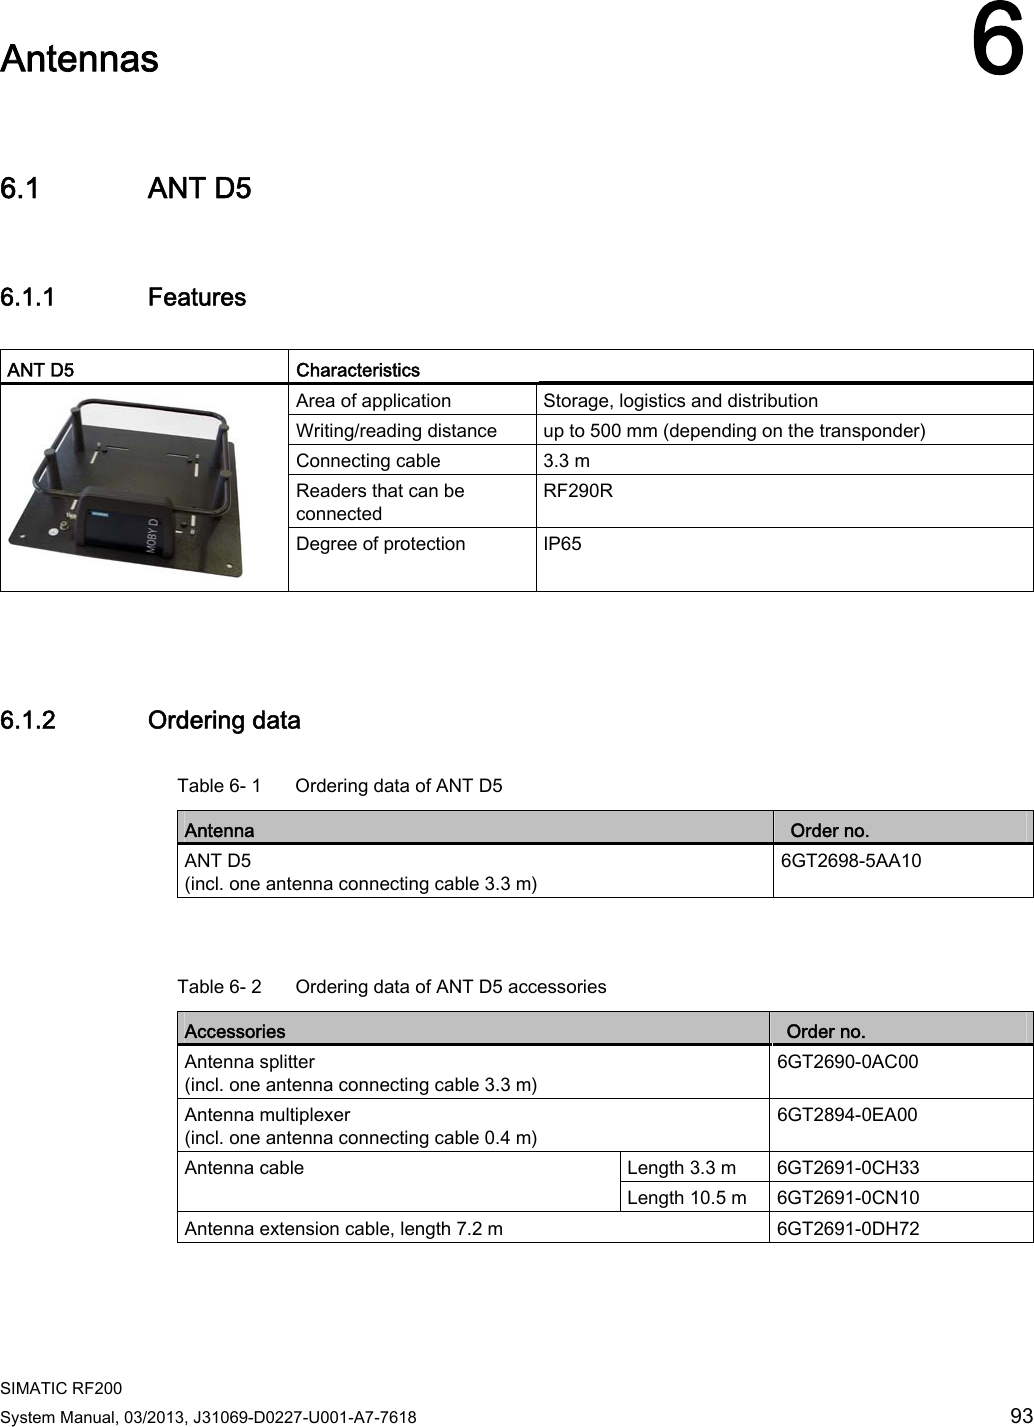  SIMATIC RF200 System Manual, 03/2013, J31069-D0227-U001-A7-7618  93 Antennas 66.1 ANT D5 6.1.1 Features  ANT D5  Characteristics Area of application  Storage, logistics and distribution  Writing/reading distance  up to 500 mm (depending on the transponder) Connecting cable  3.3 m Readers that can be connected RF290R  Degree of protection  IP65  6.1.2 Ordering data Table 6- 1  Ordering data of ANT D5 Antenna   Order no. ANT D5 (incl. one antenna connecting cable 3.3 m) 6GT2698-5AA10  Table 6- 2  Ordering data of ANT D5 accessories Accessories   Order no. Antenna splitter (incl. one antenna connecting cable 3.3 m) 6GT2690-0AC00 Antenna multiplexer (incl. one antenna connecting cable 0.4 m) 6GT2894-0EA00 Length 3.3 m  6GT2691-0CH33 Antenna cable  Length 10.5 m  6GT2691-0CN10 Antenna extension cable, length 7.2 m  6GT2691-0DH72 